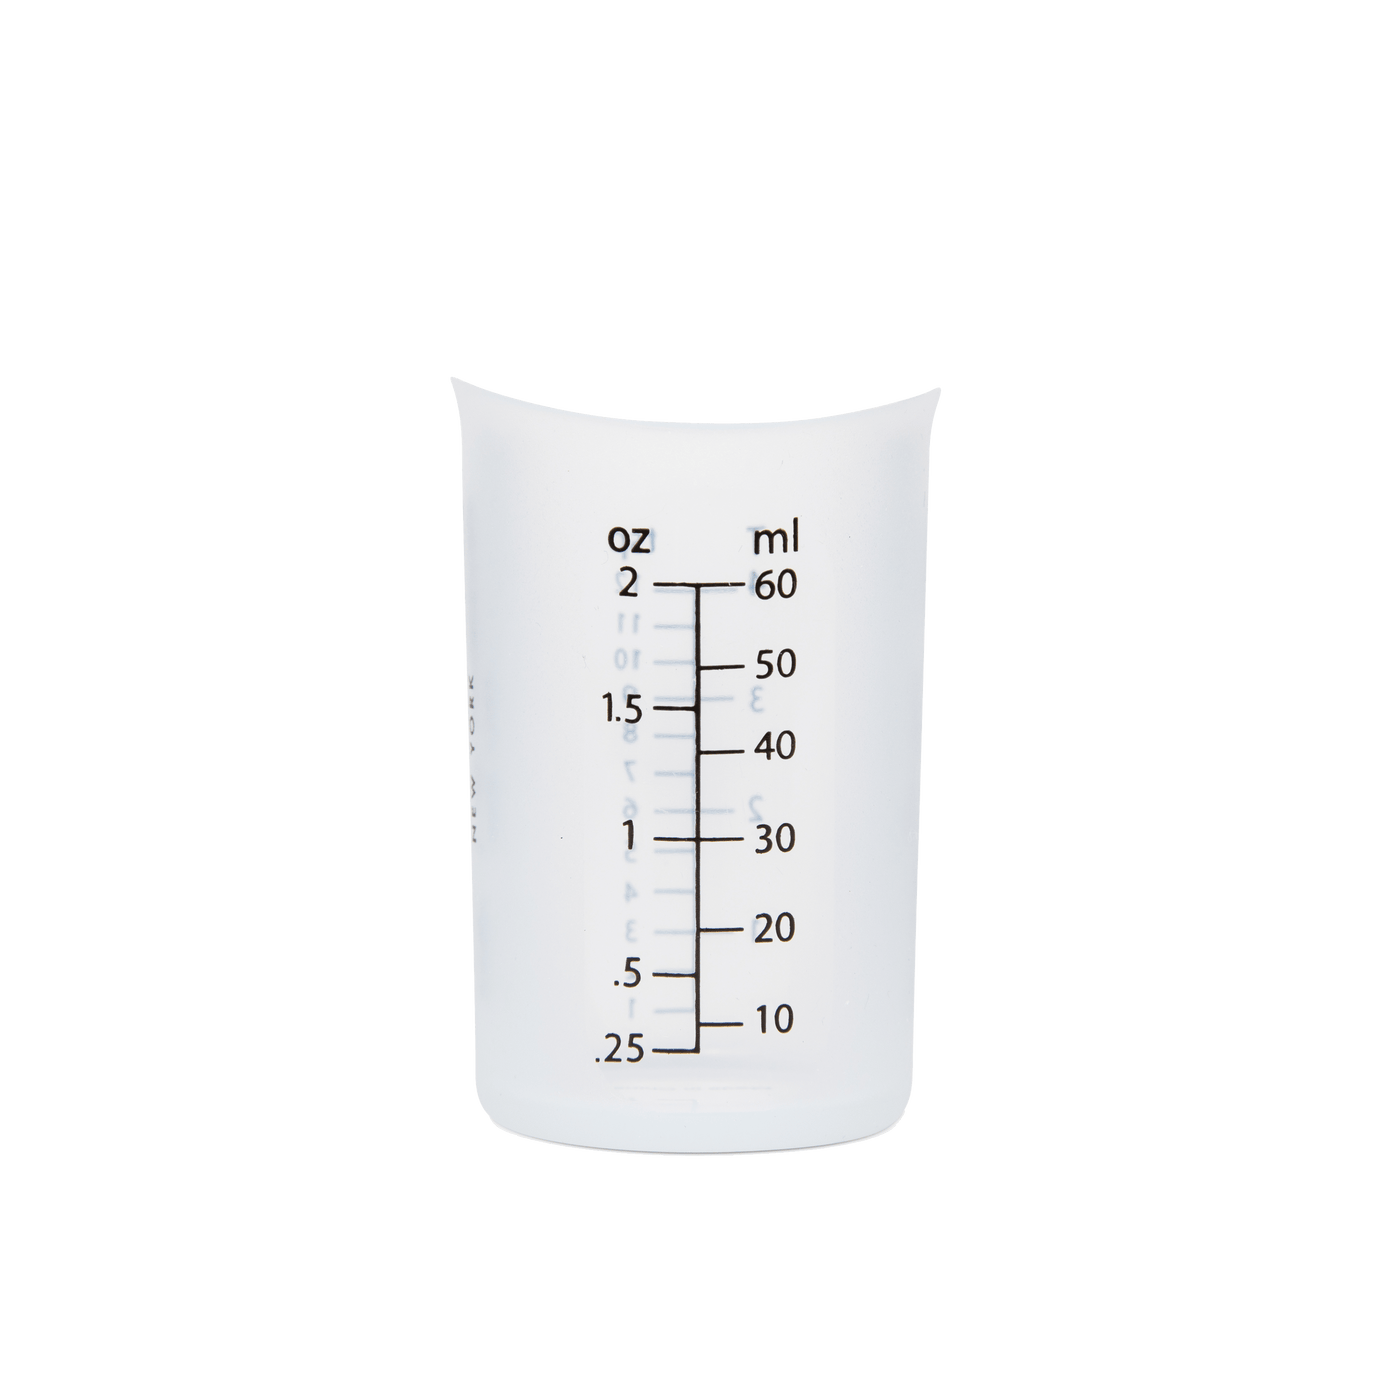 The Laundress Laundry Measuring Cup, a reusable silicone cup for doing The Laundress fabric care solutions.